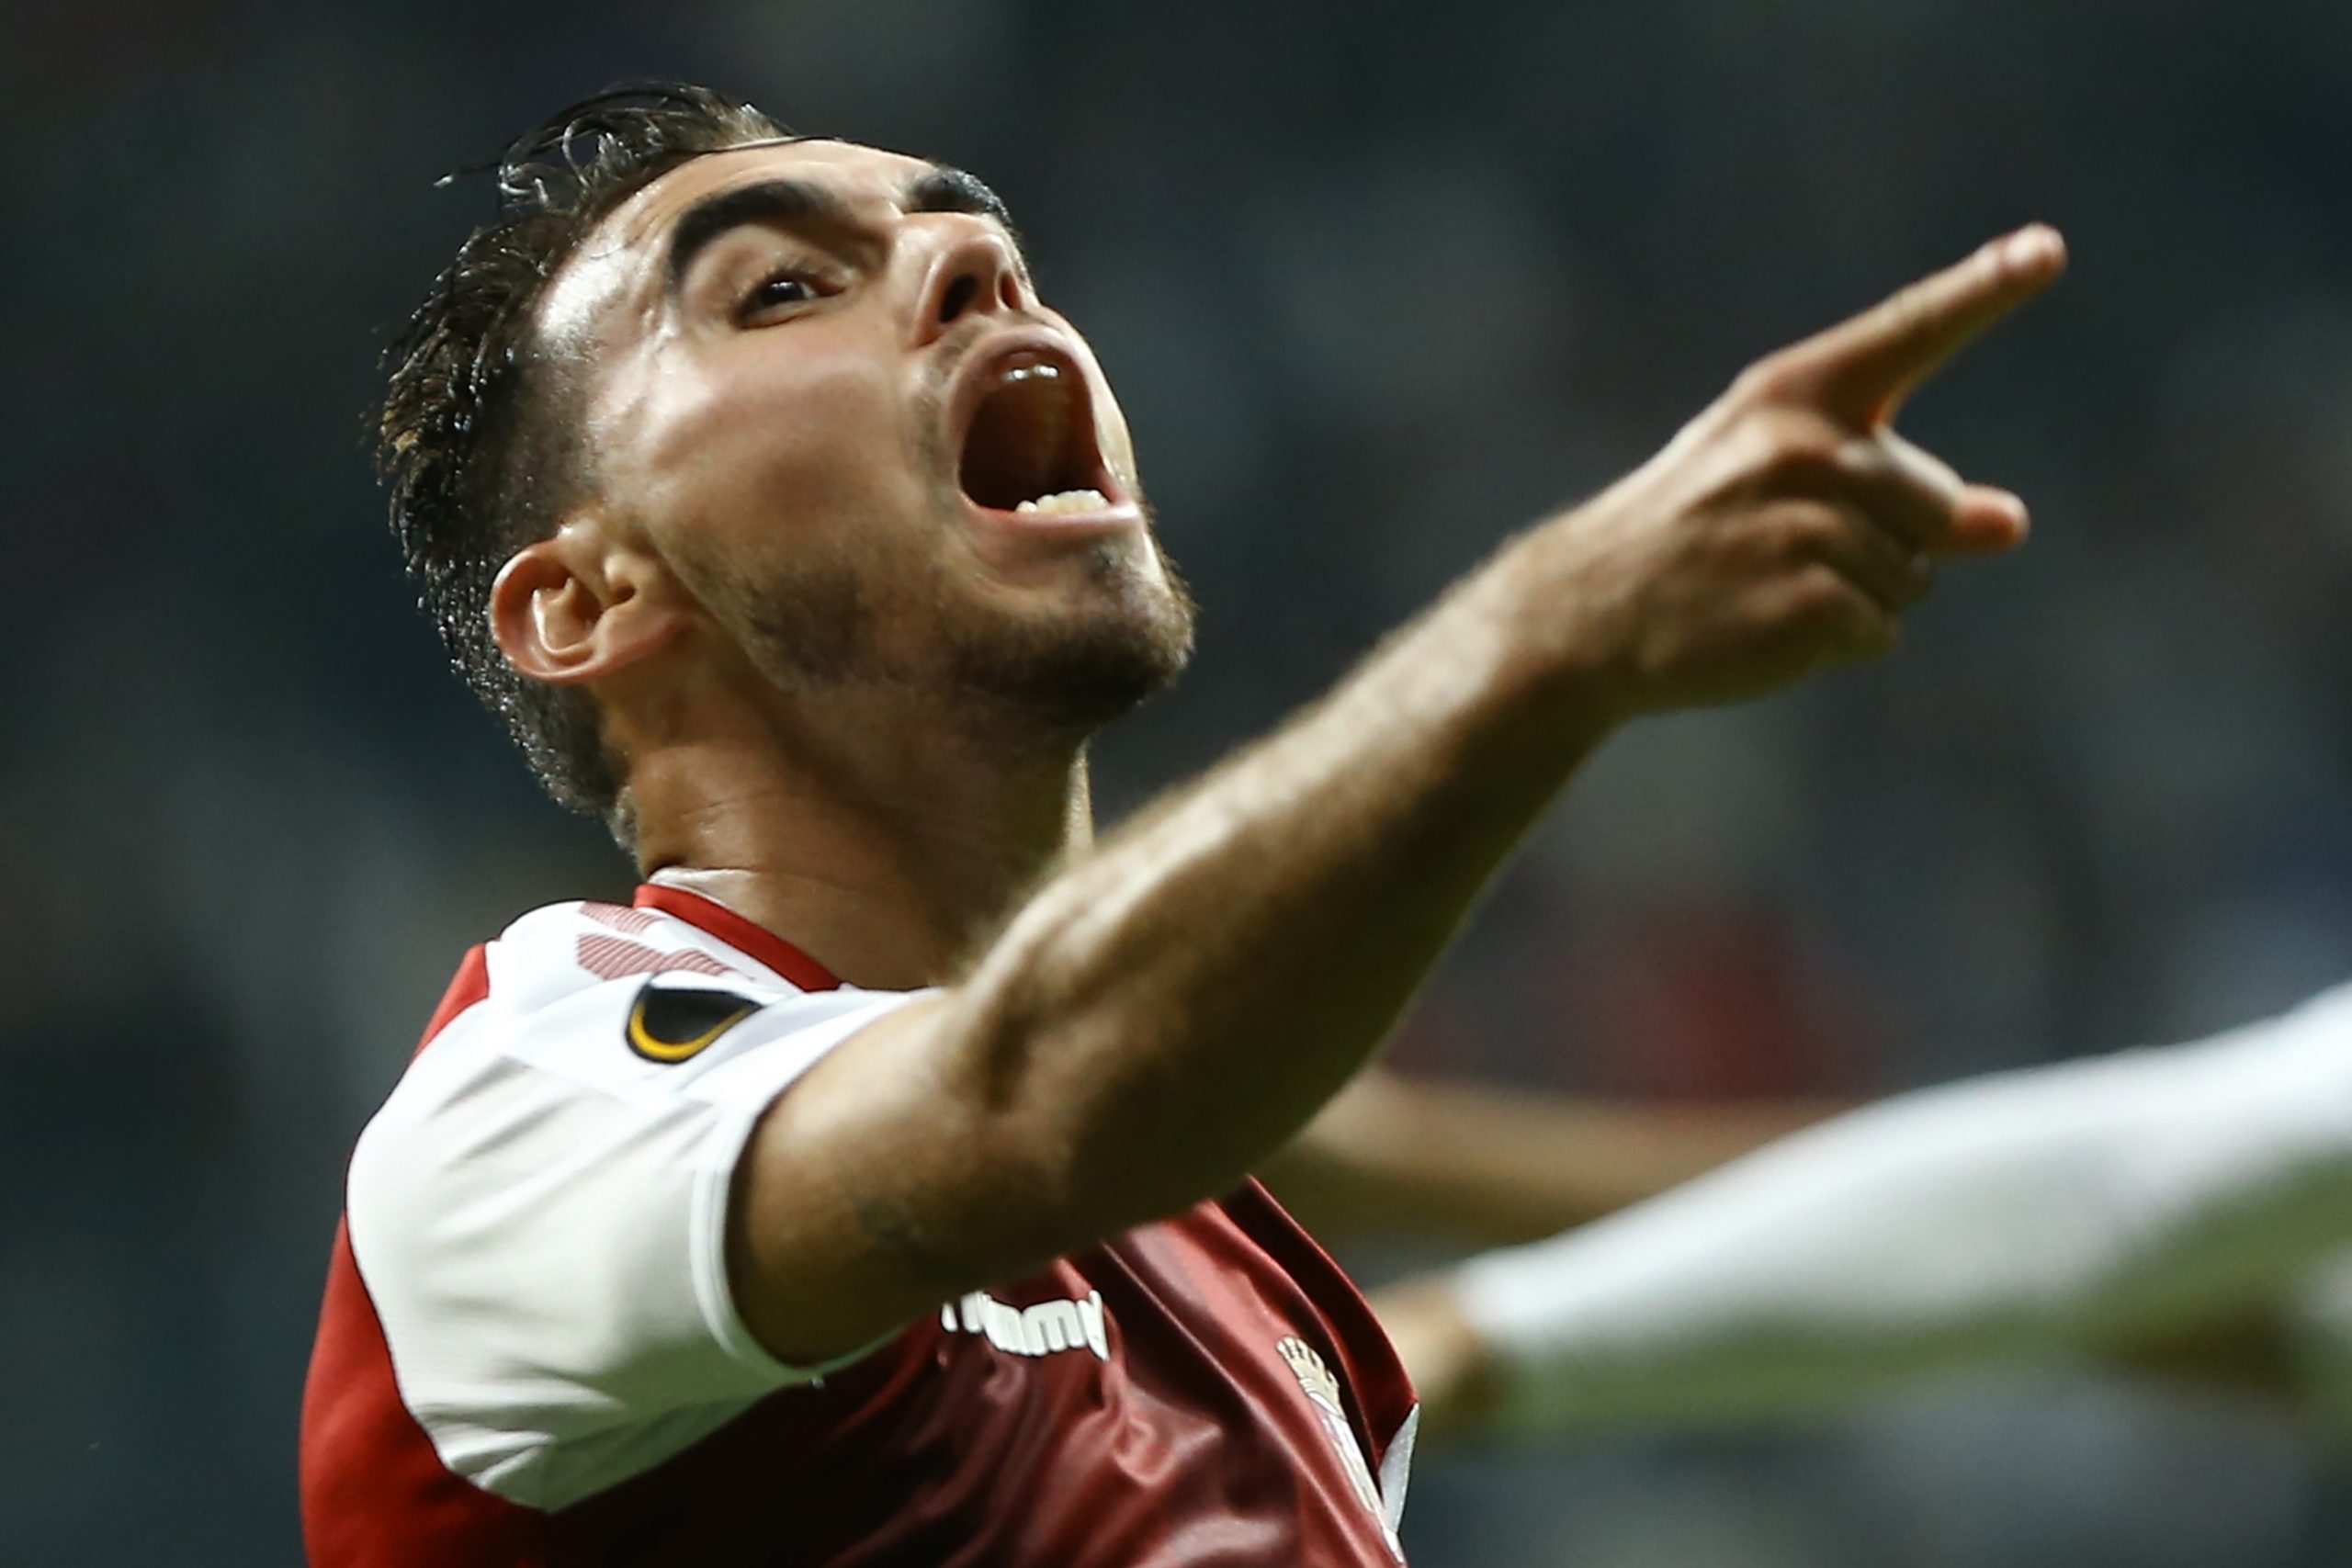 Ricardo Horta celebrates after scoring a goal against Besiktas in the Europa League (Getty Images)